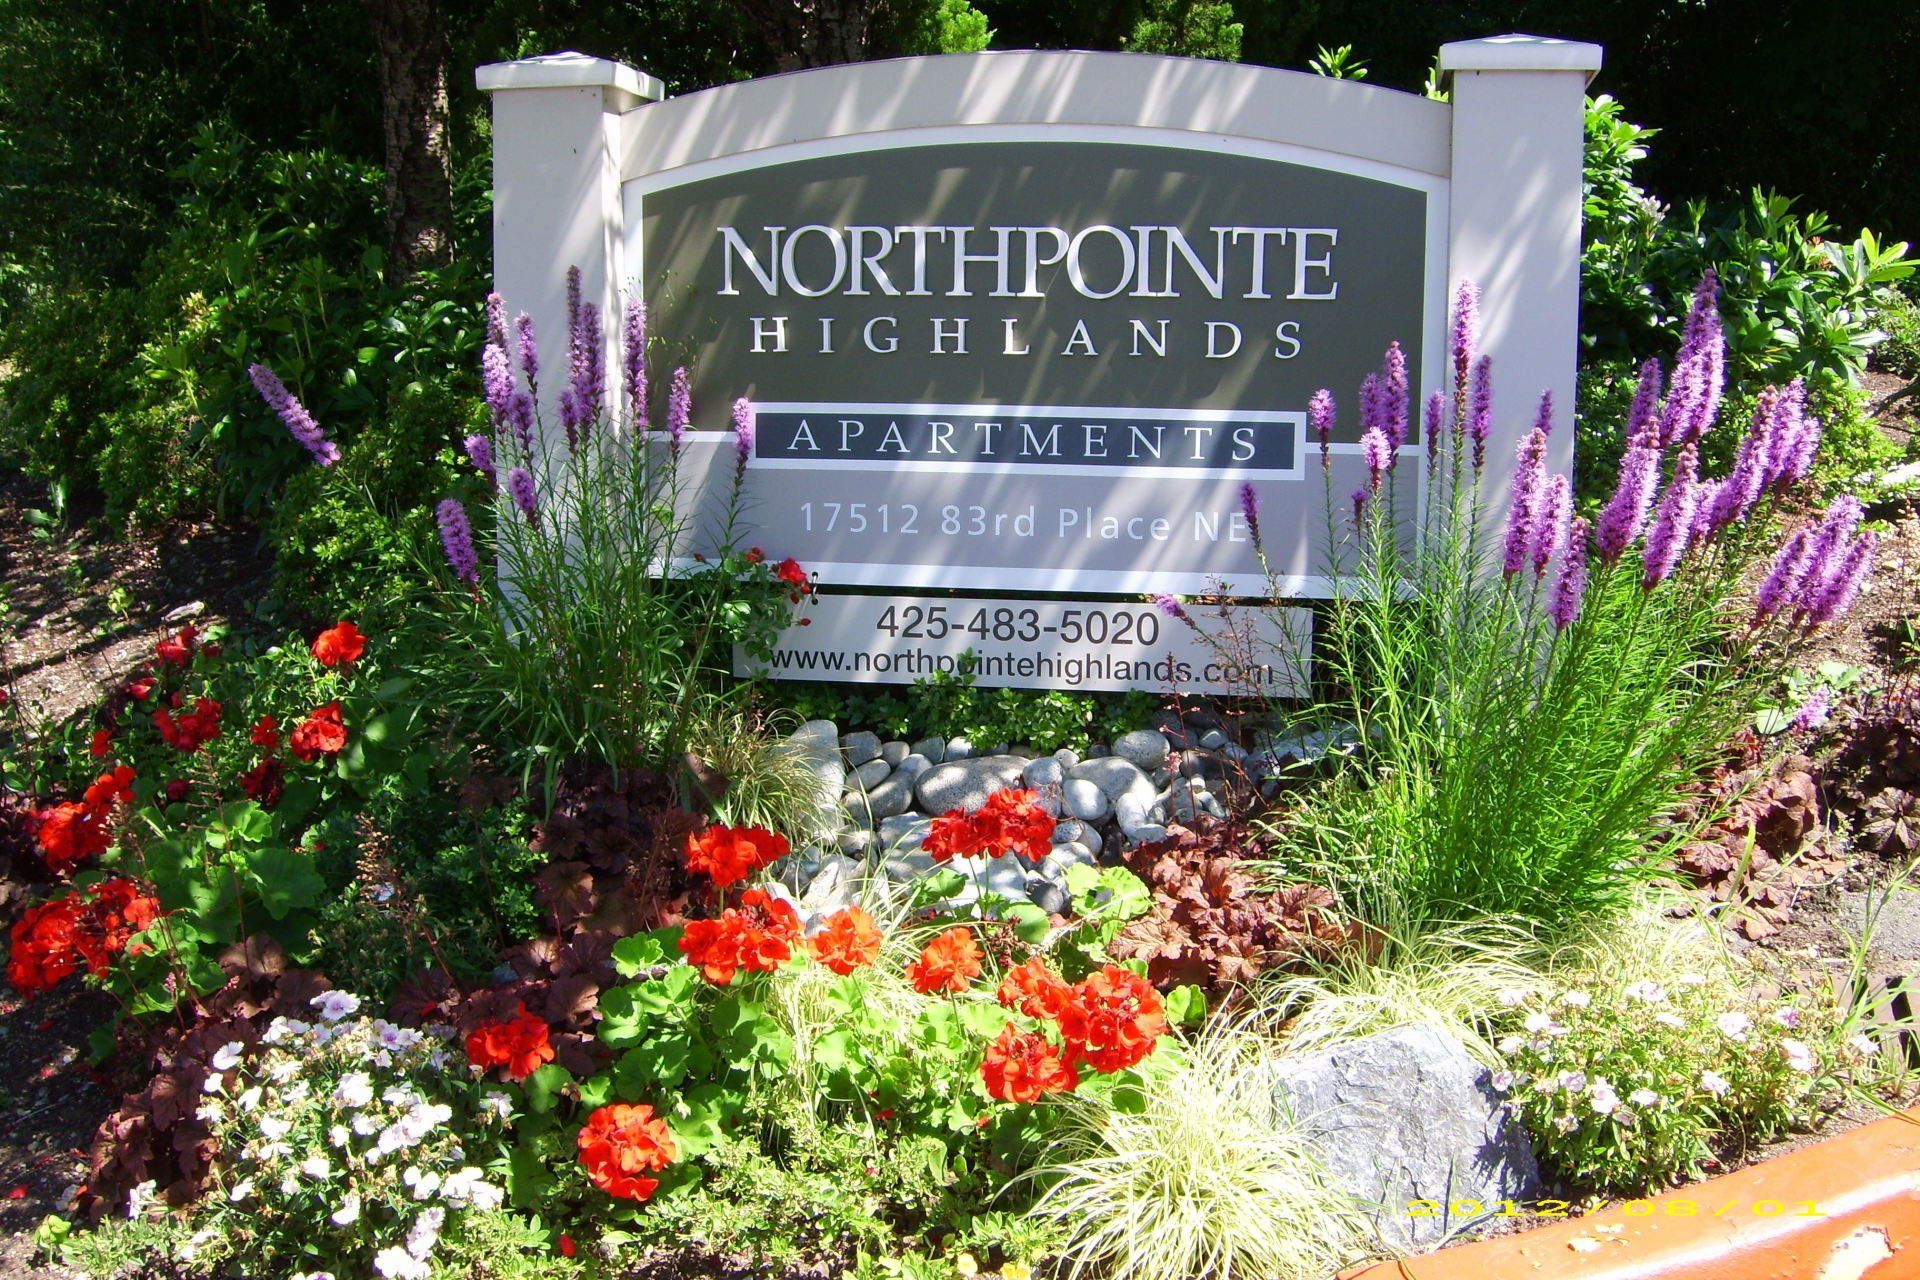 Northpointe Highlands